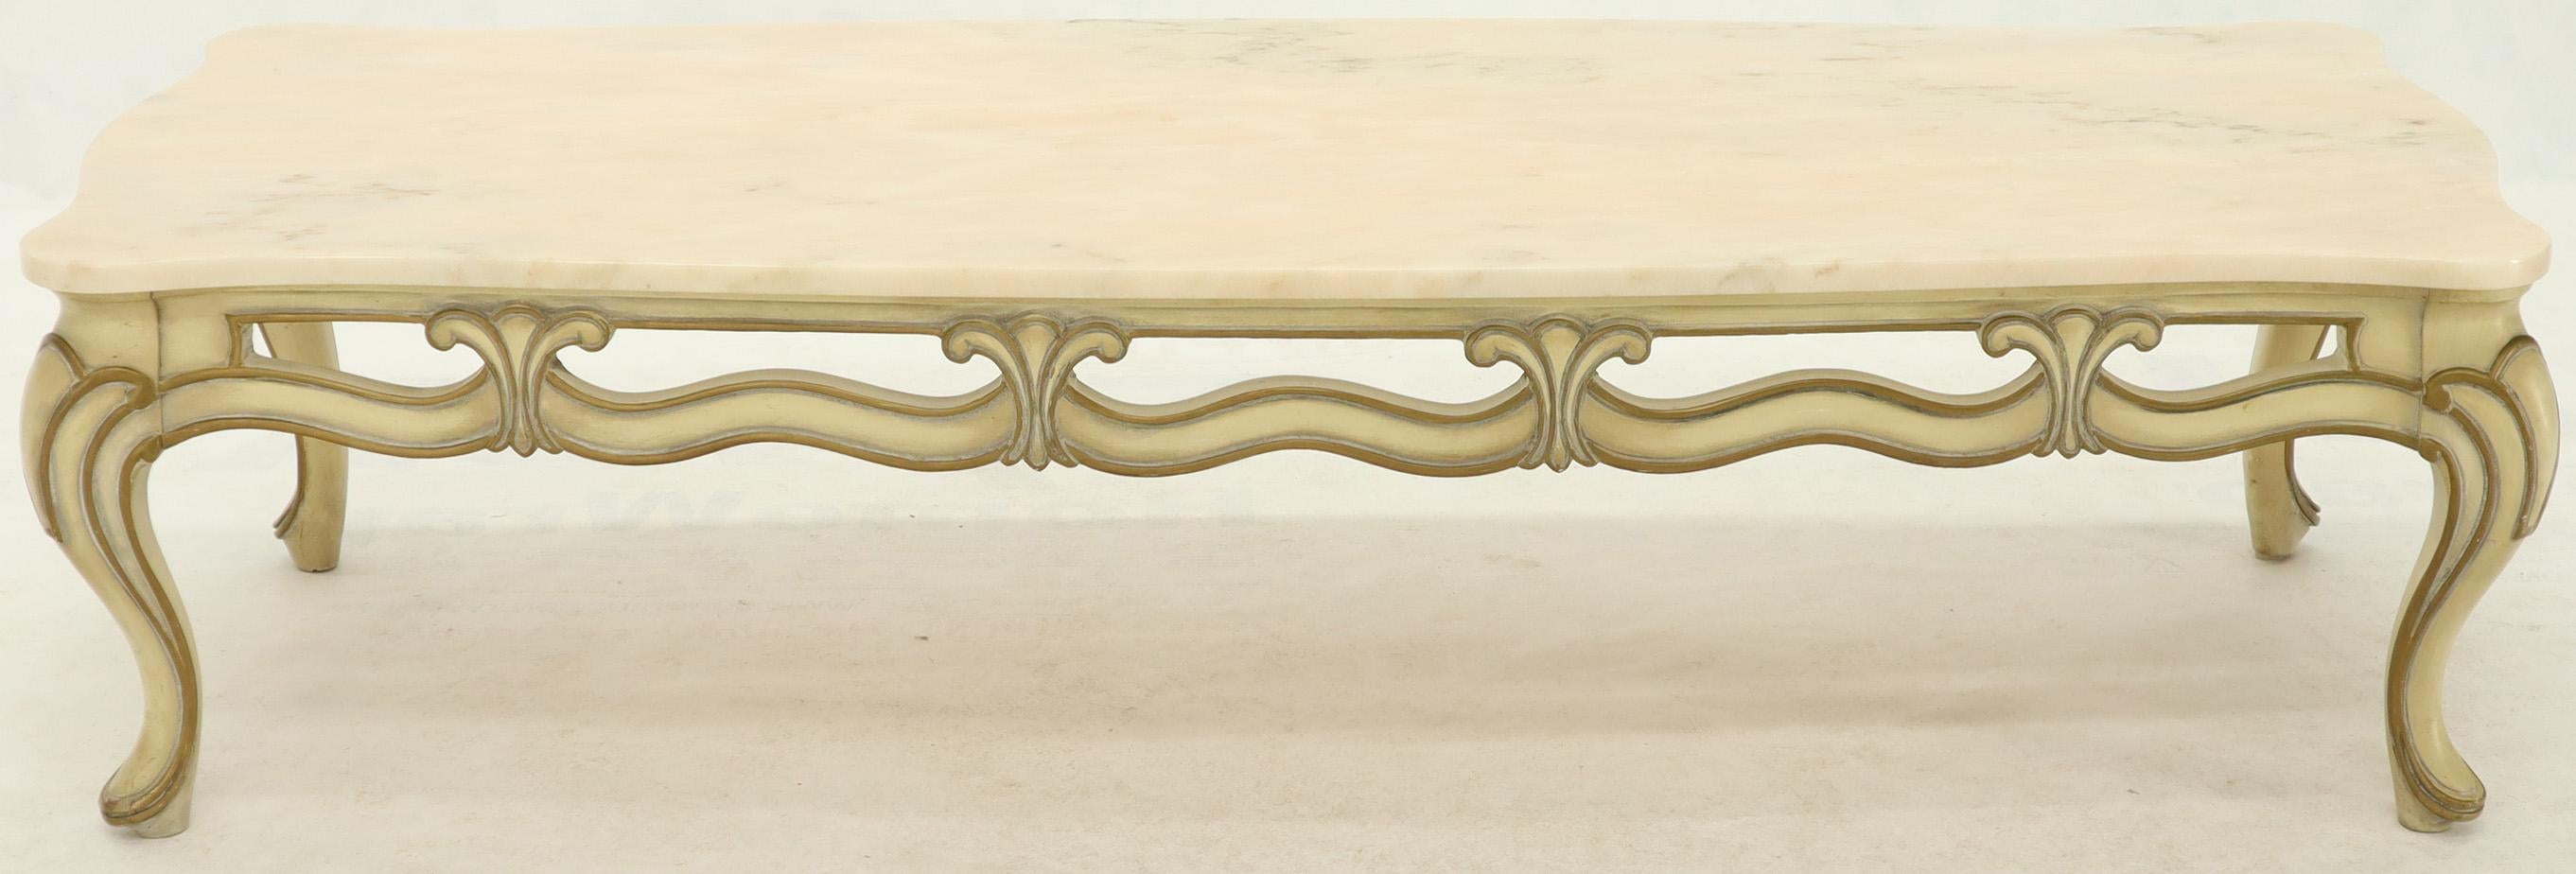 french provincial coffee table legs